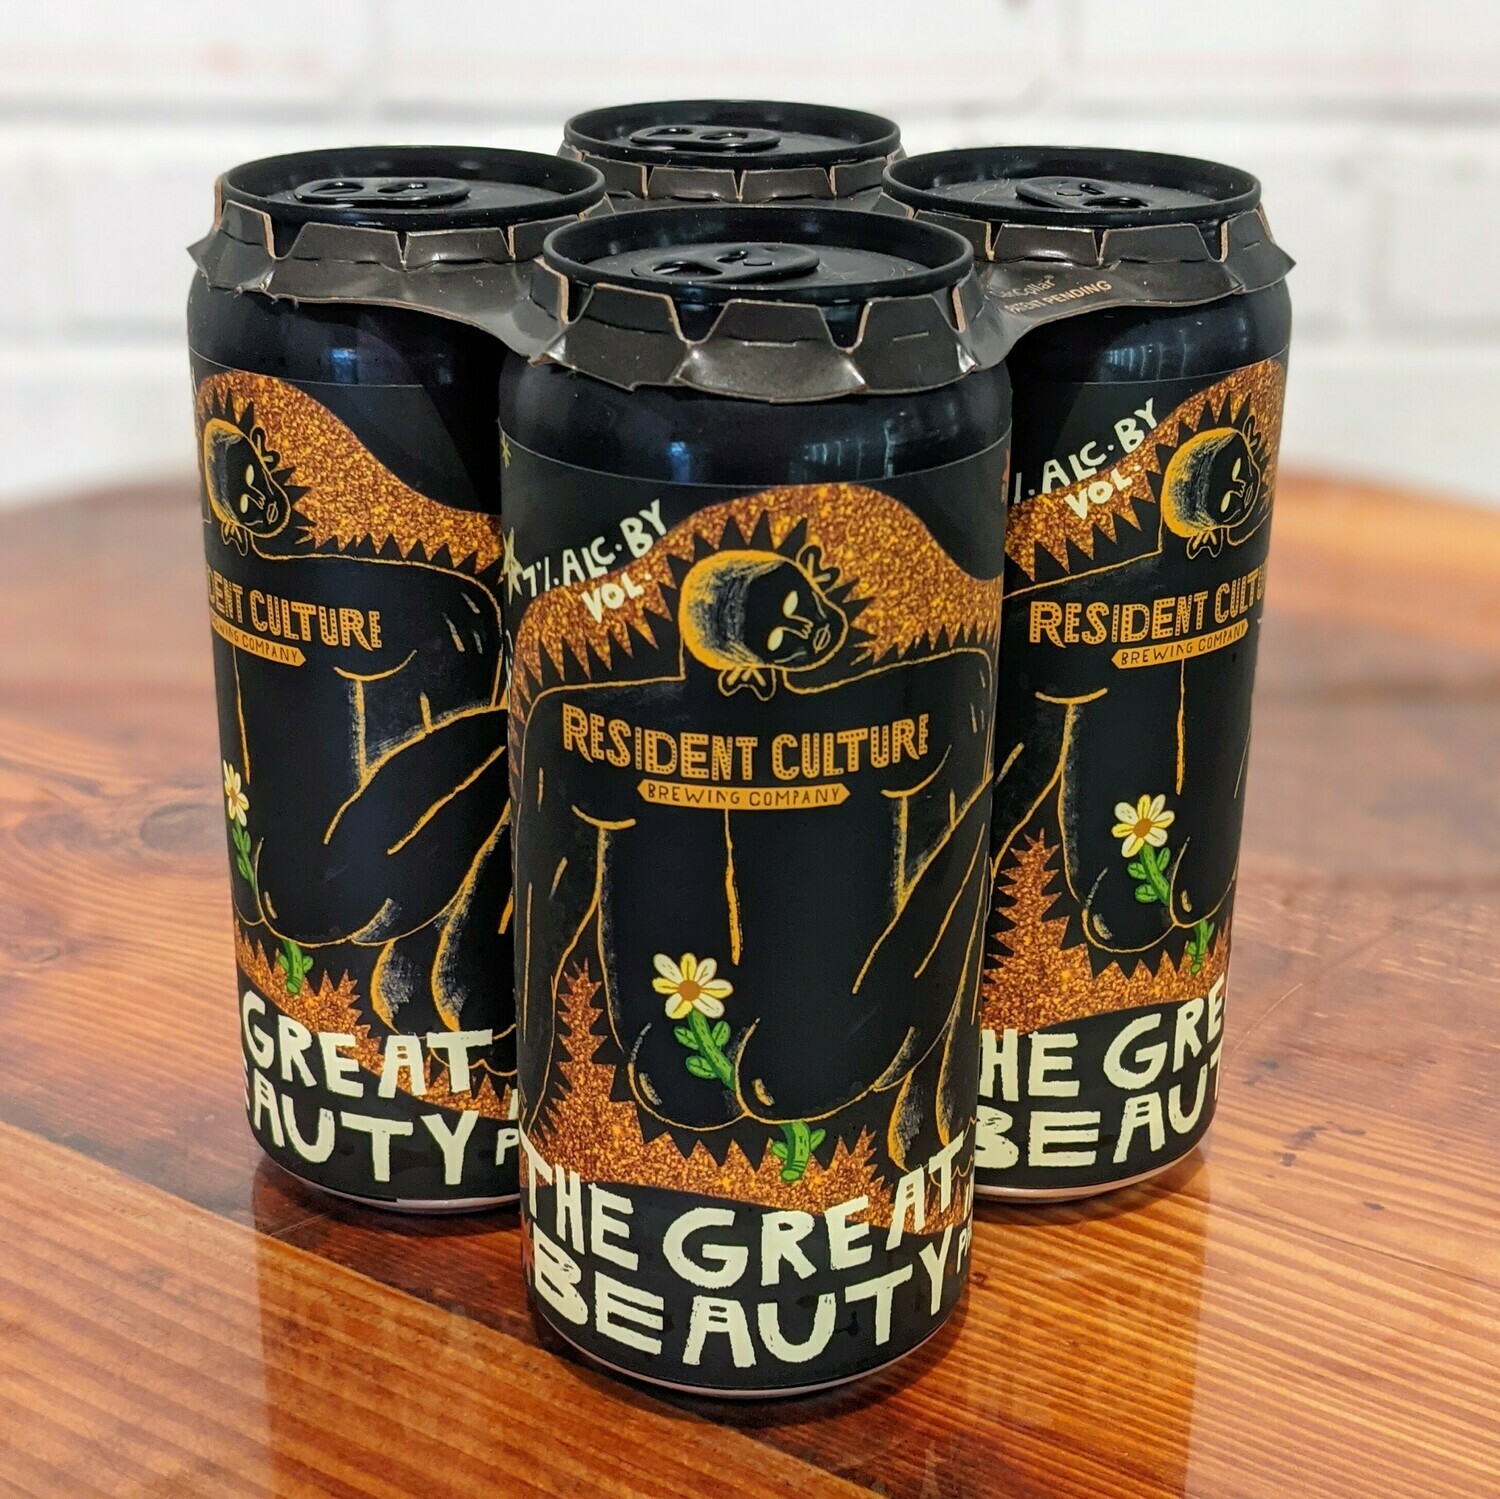 Resident Culture The Great Beauty (4 Pk)